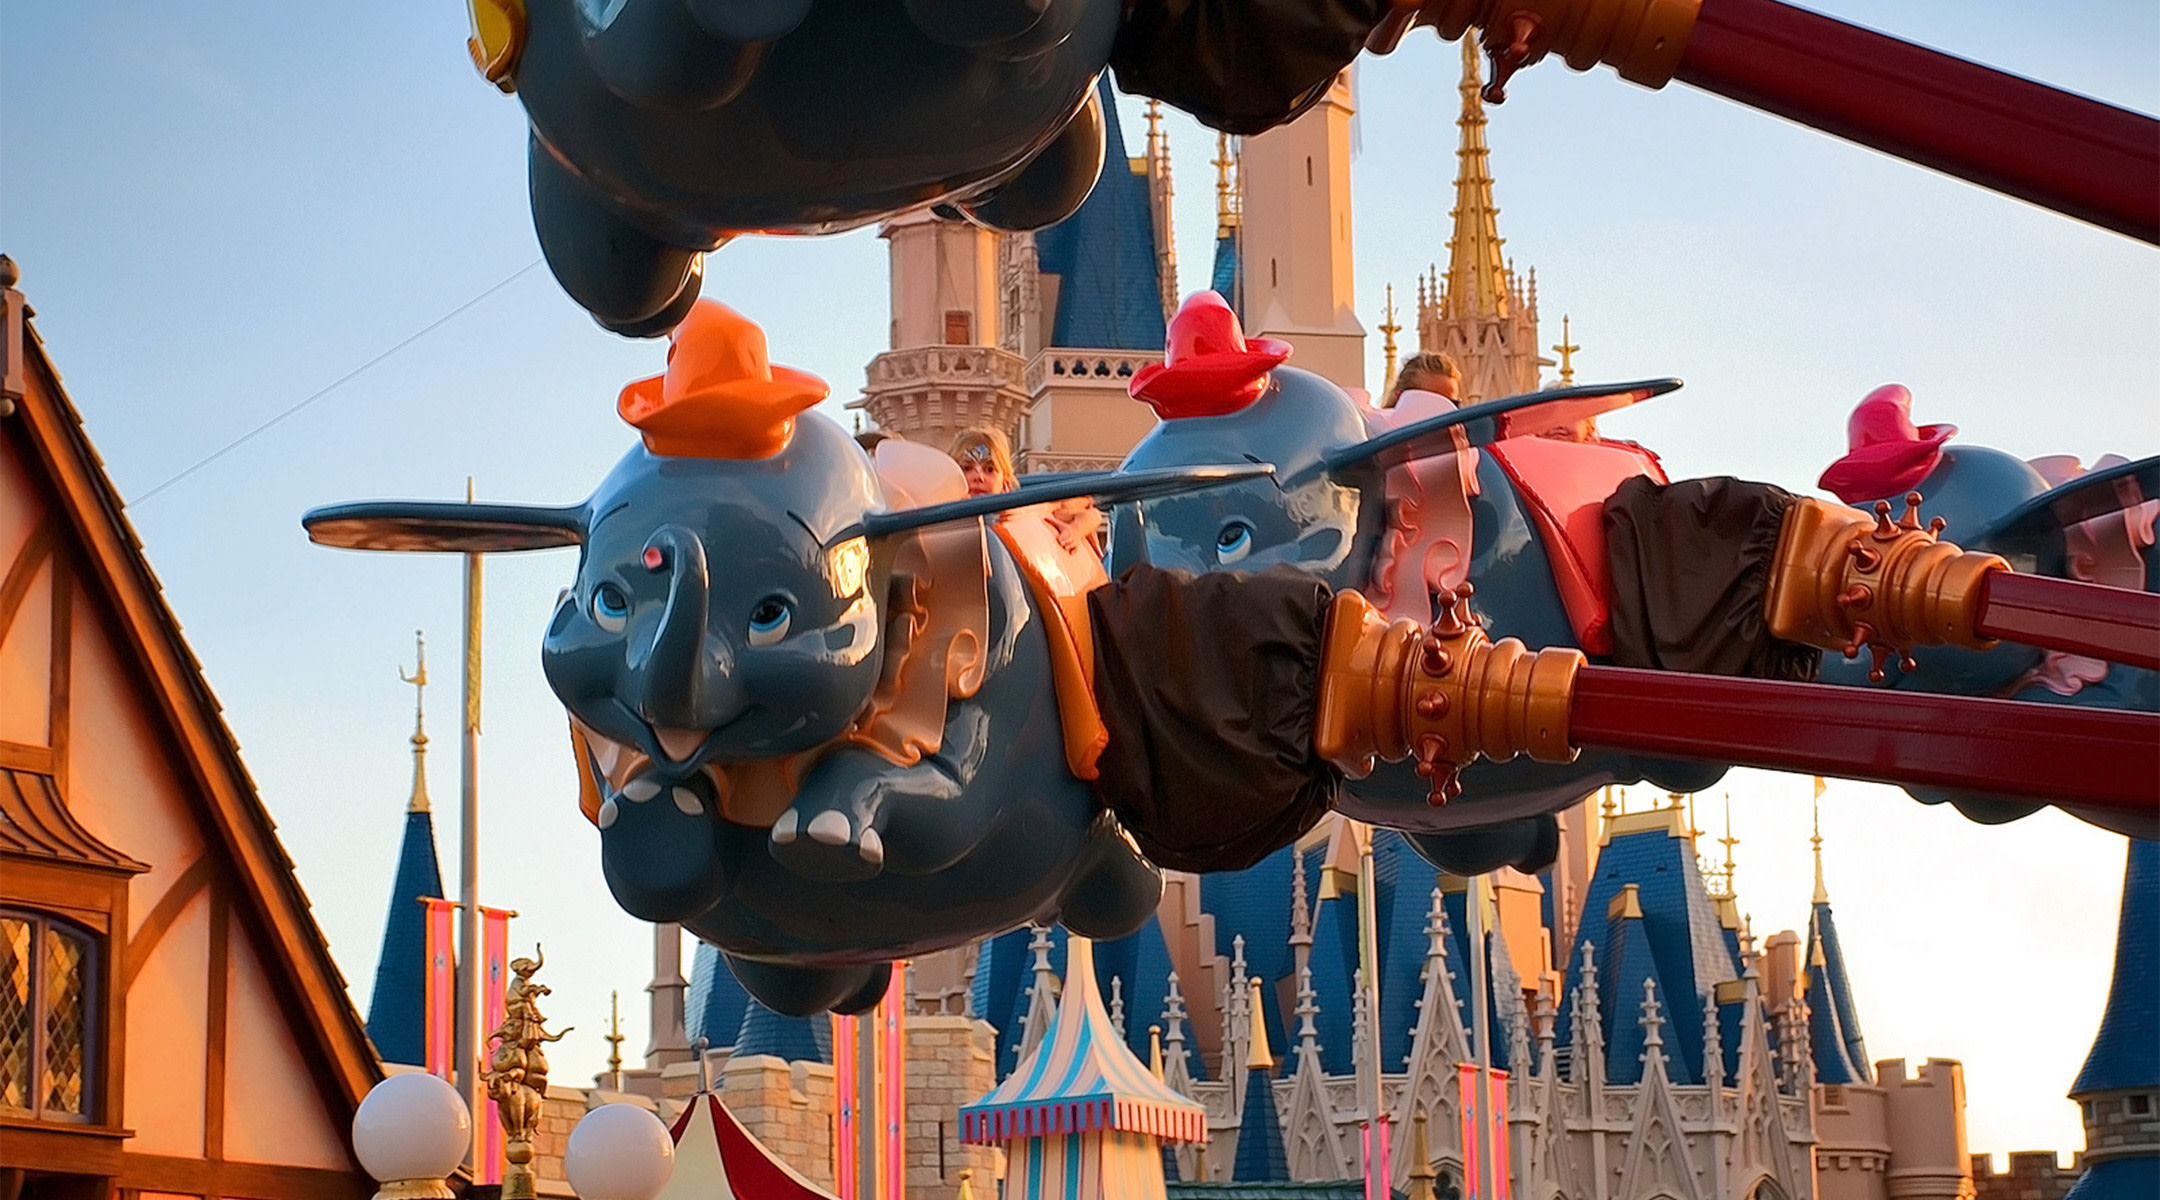 dumbo ride at disney world, great ride for kids who are scared of rides